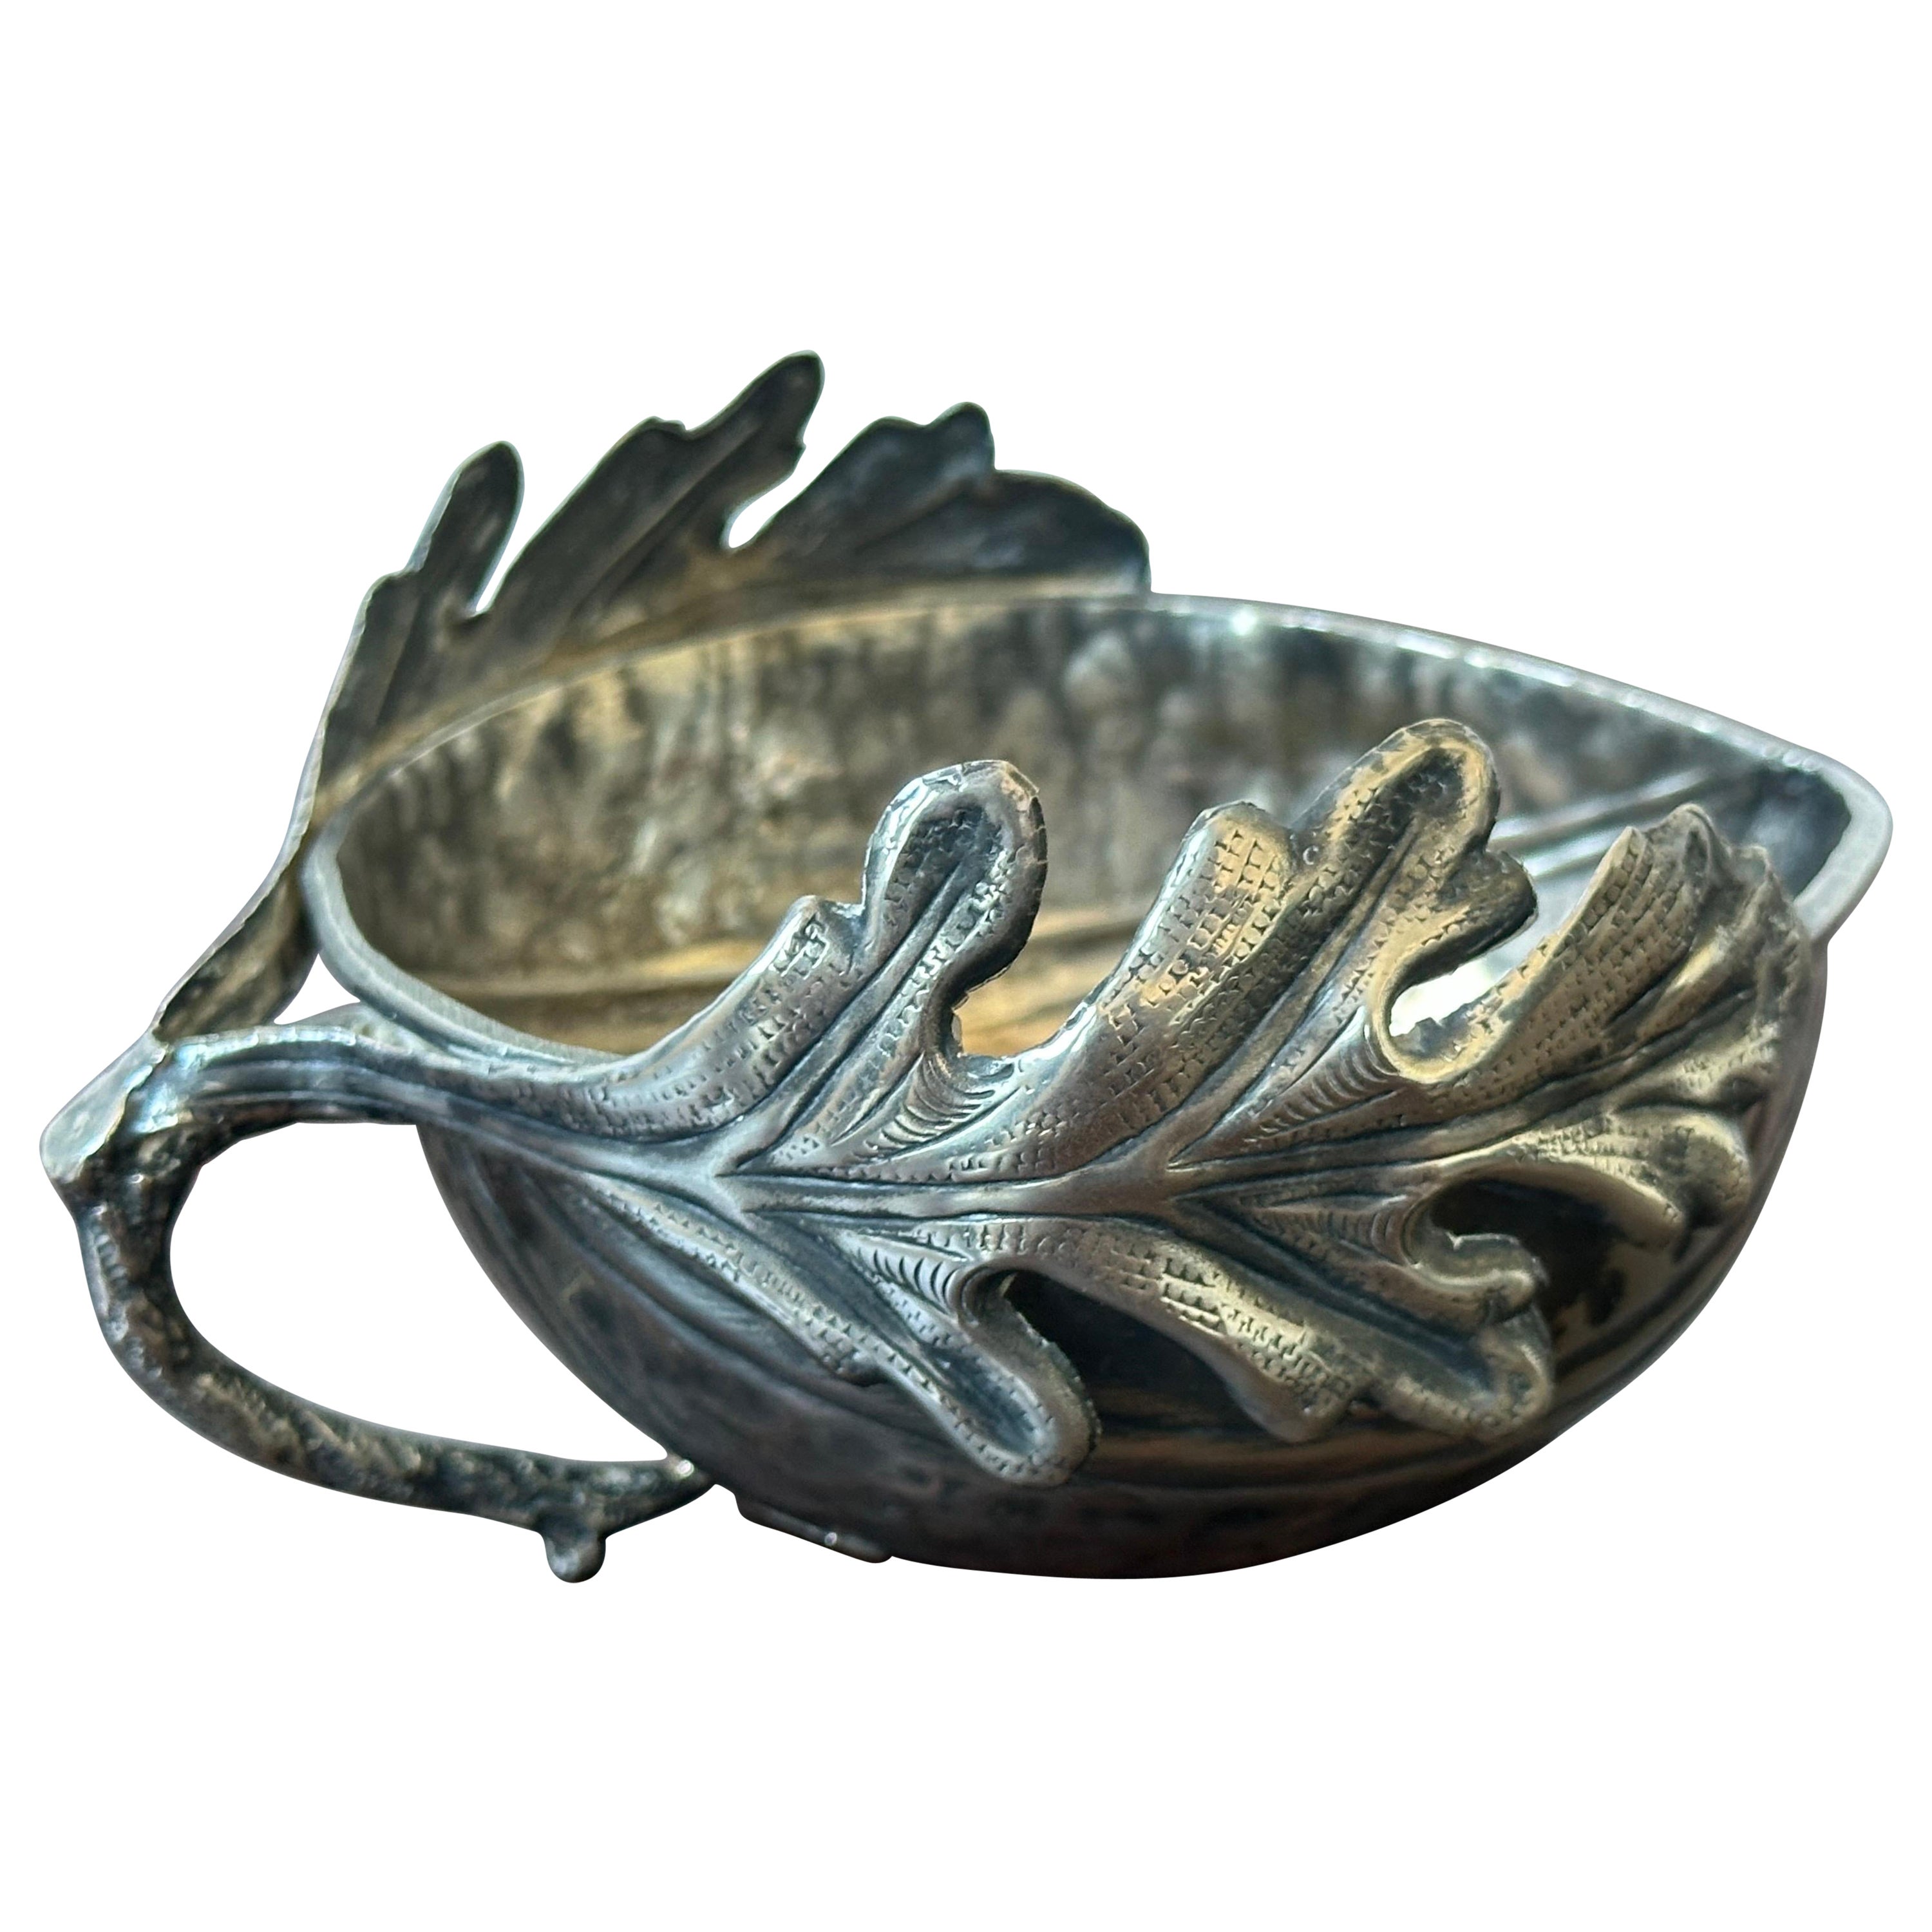 Gabriella Crespi Silver Plated Noci Acorn Bowl With Handle, Signed For Sale